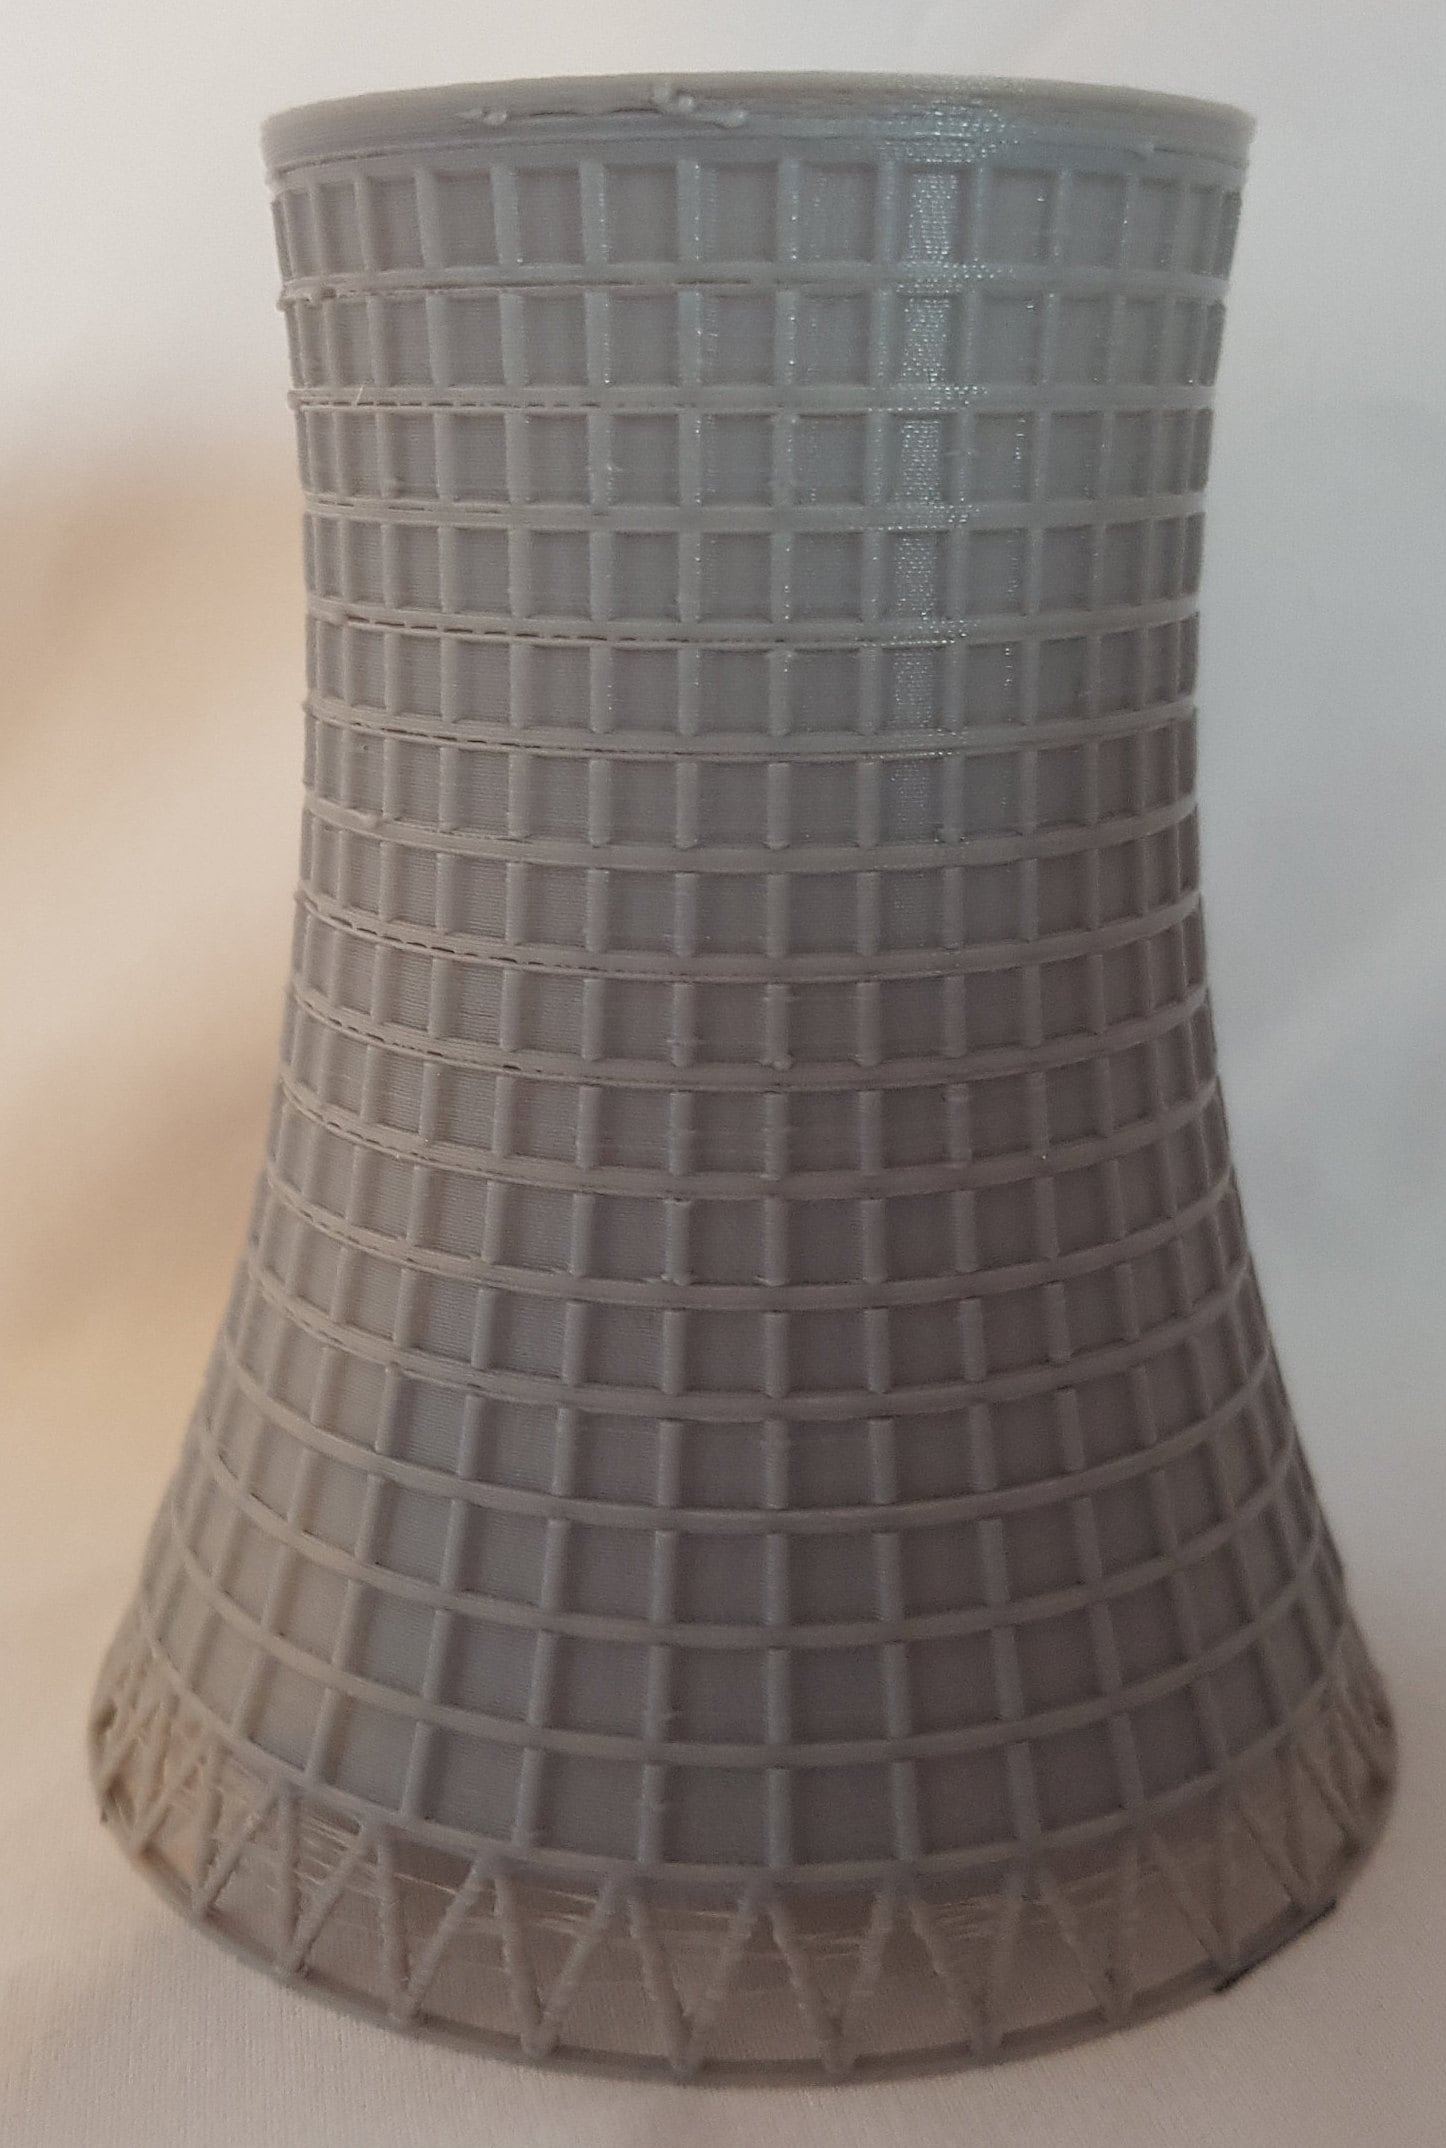 85mm tall 76mm base 50mm top. 1:2000th Scale Power Station cooling tower